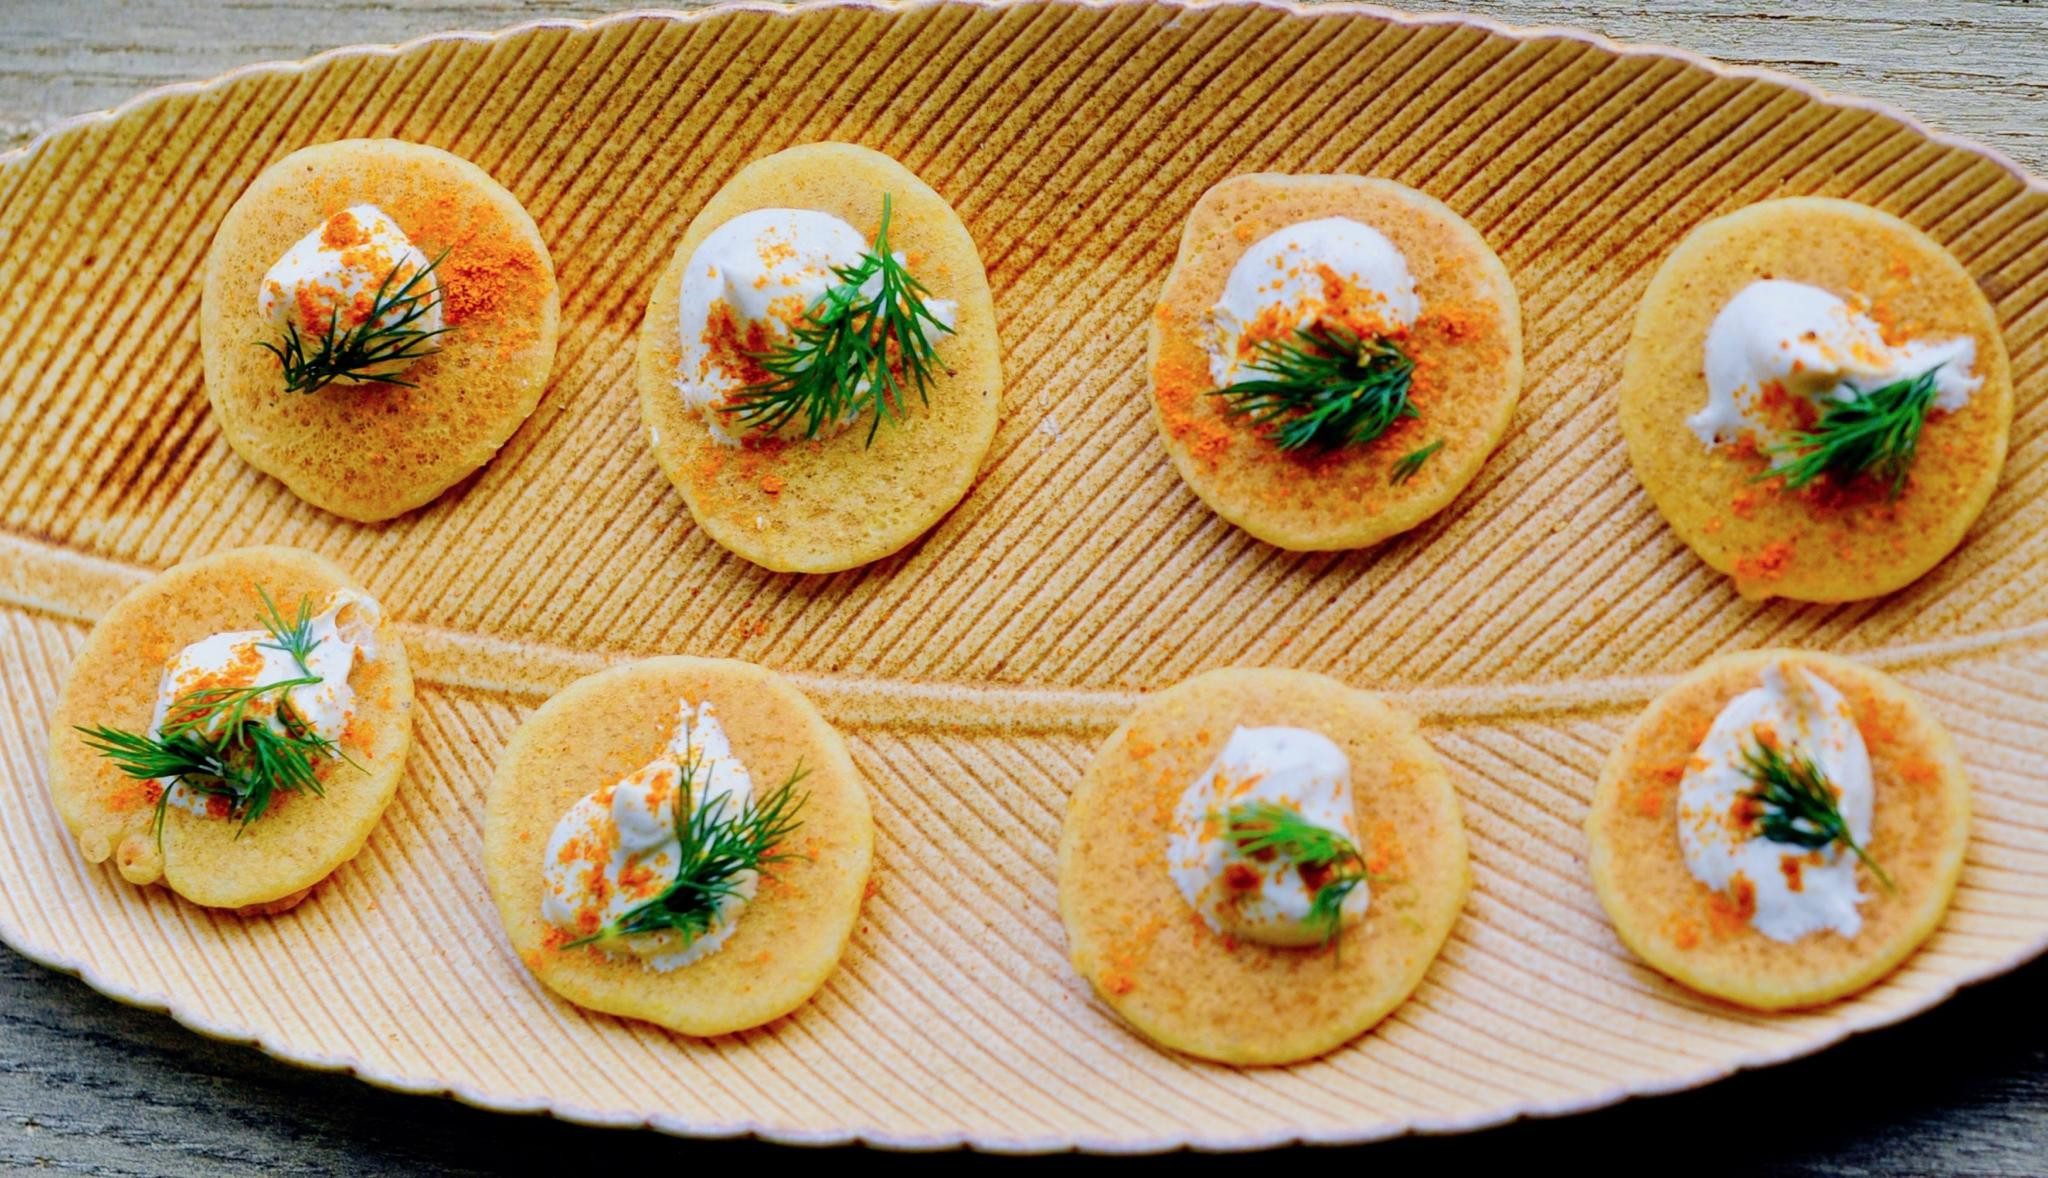 Vegan Gluten Free Appetizers
 Easy e Bite Blini with Curried Sour Cream Appetizers